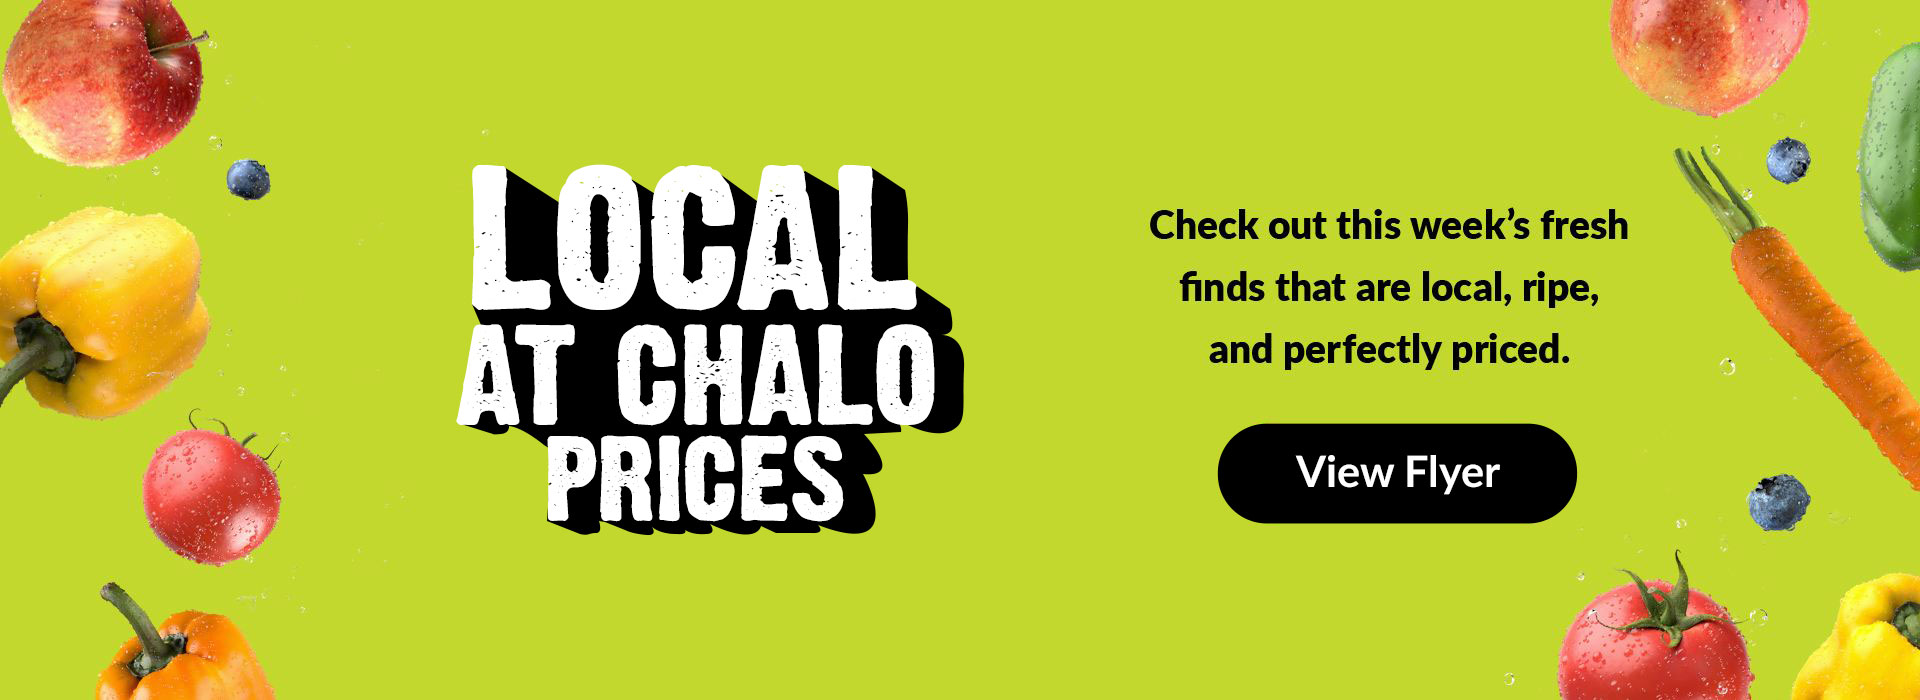 Text Reading 'Local at Chalo prices. Check out this week's fresh finds that are local, ripe, and perfectly priced. For more details click on the View Flyer button given below.'